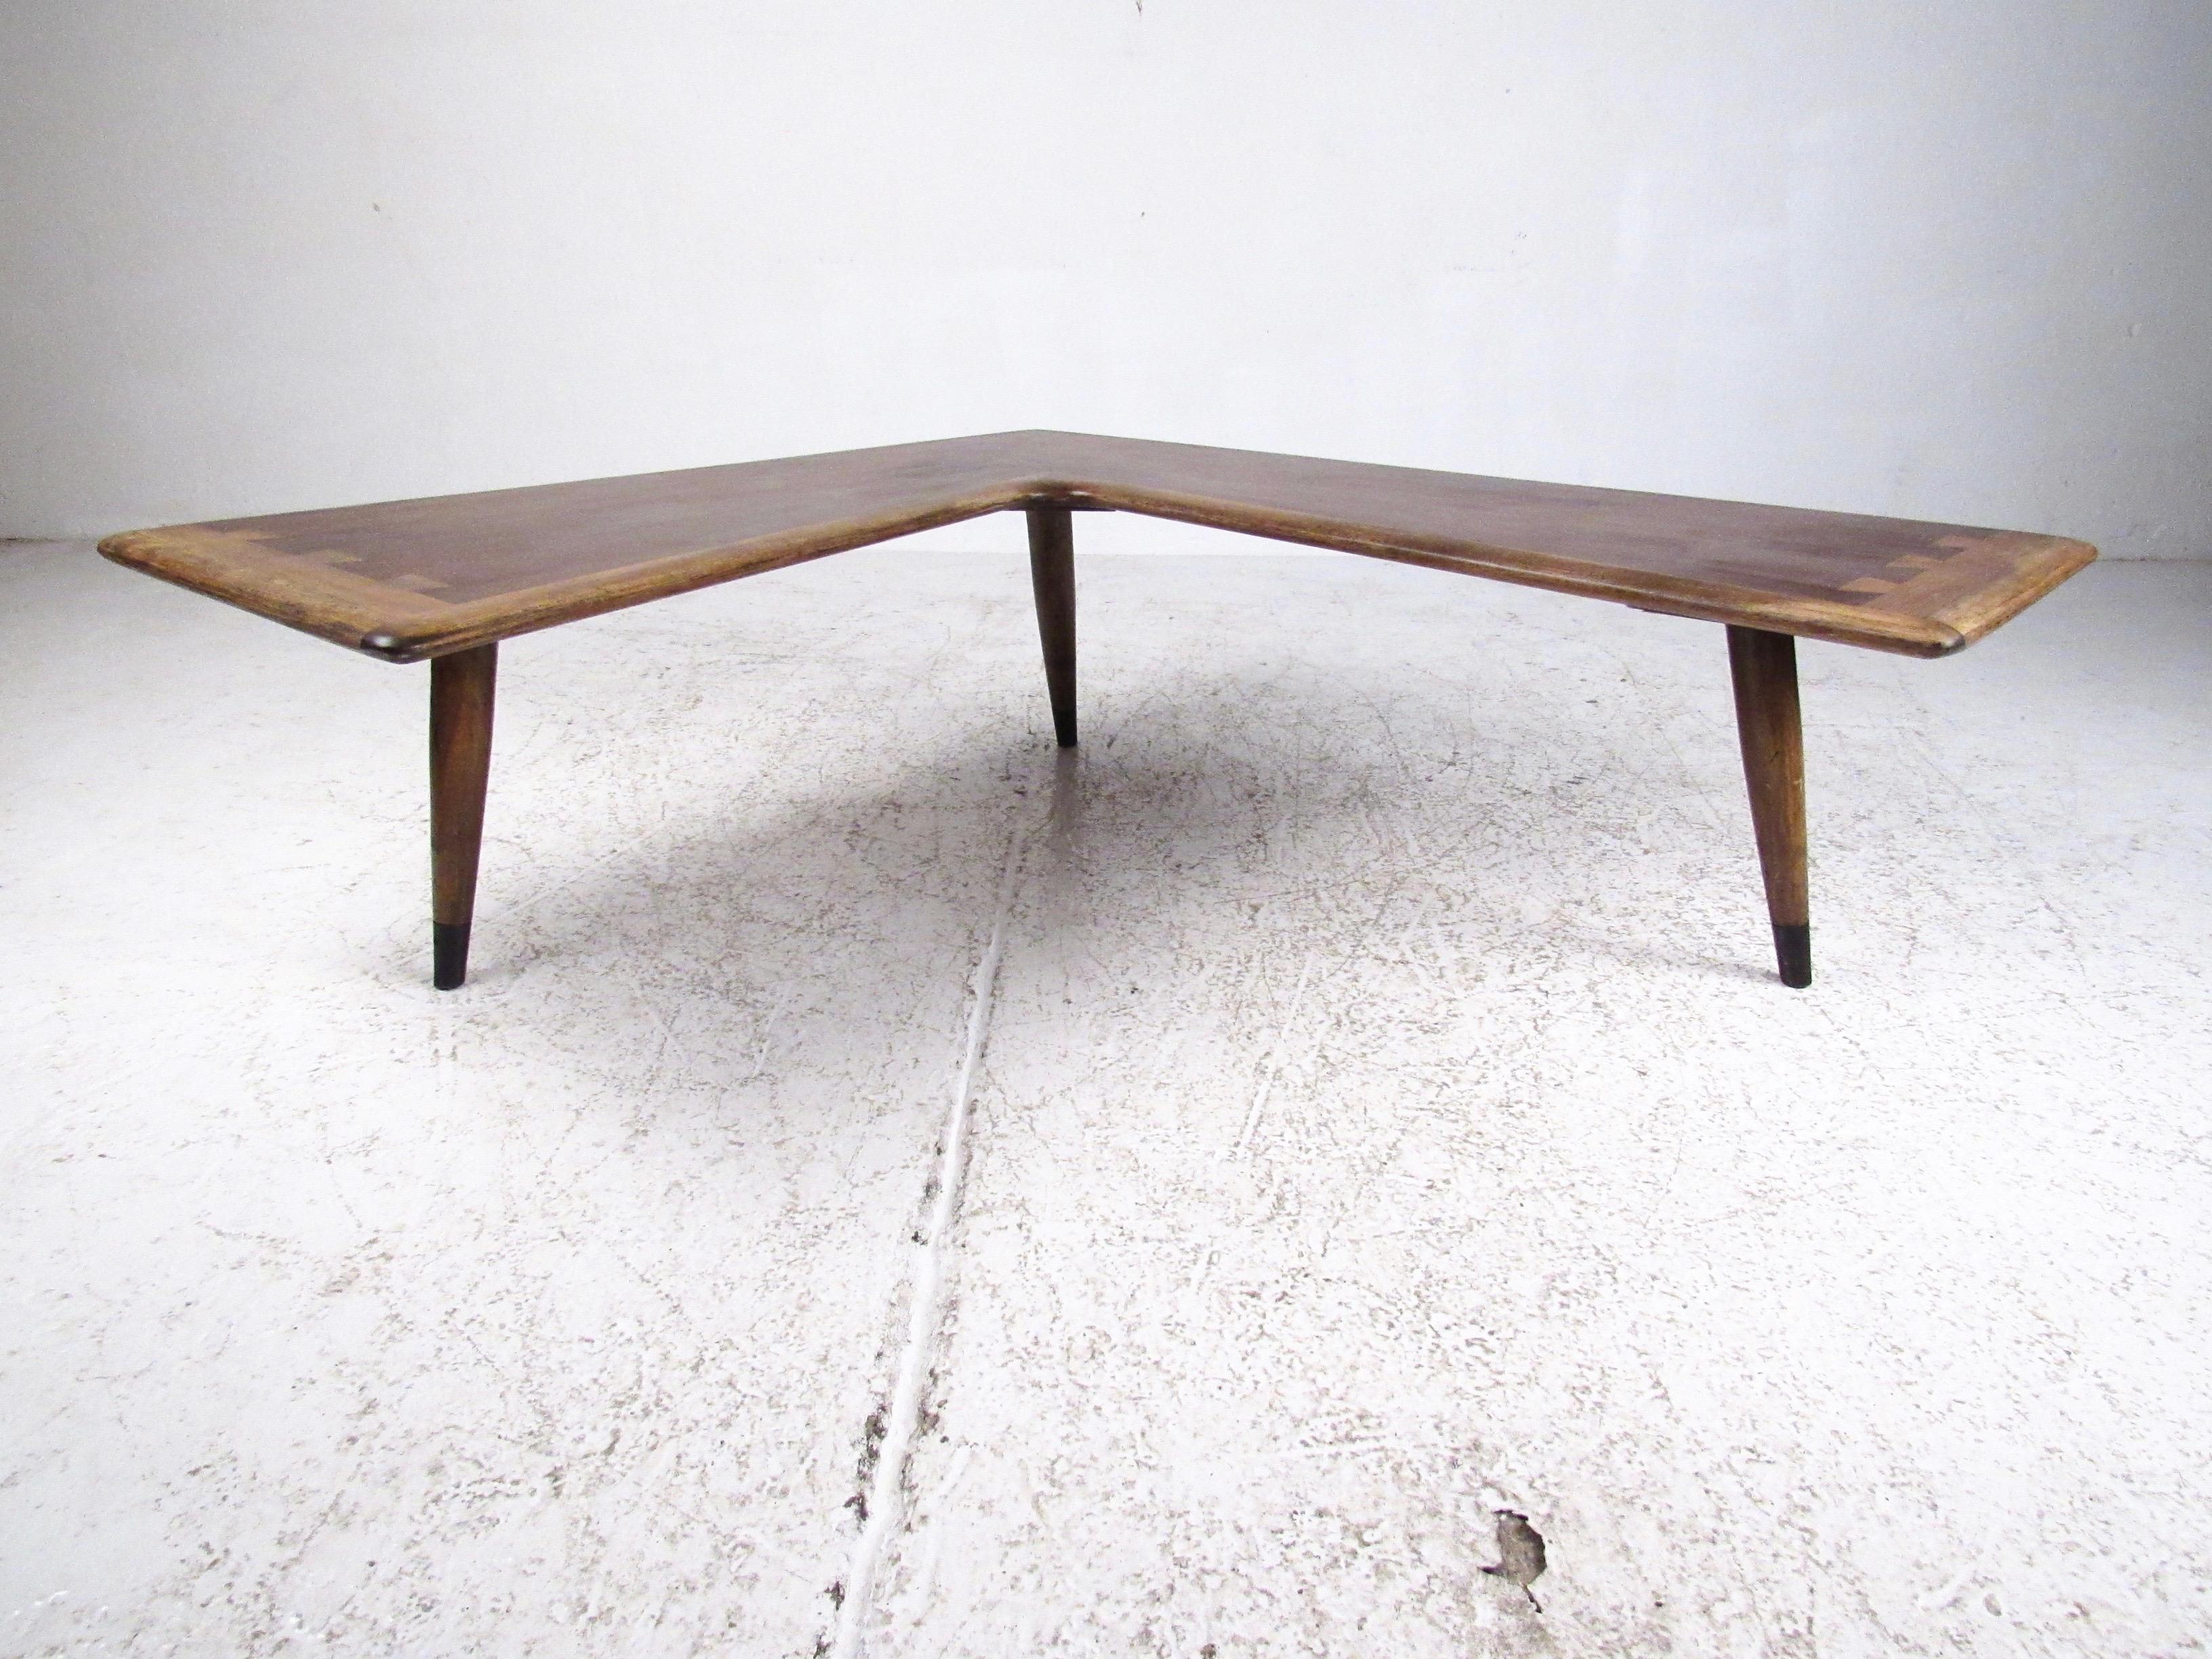 This striking Mid-Century Modern coffee table features iconic Lane joinery and impressive sculpted boomerang shape. The tapered hardwood legs and two tone wood finish make this a memorable centerpiece for home or business seating area. Perfect